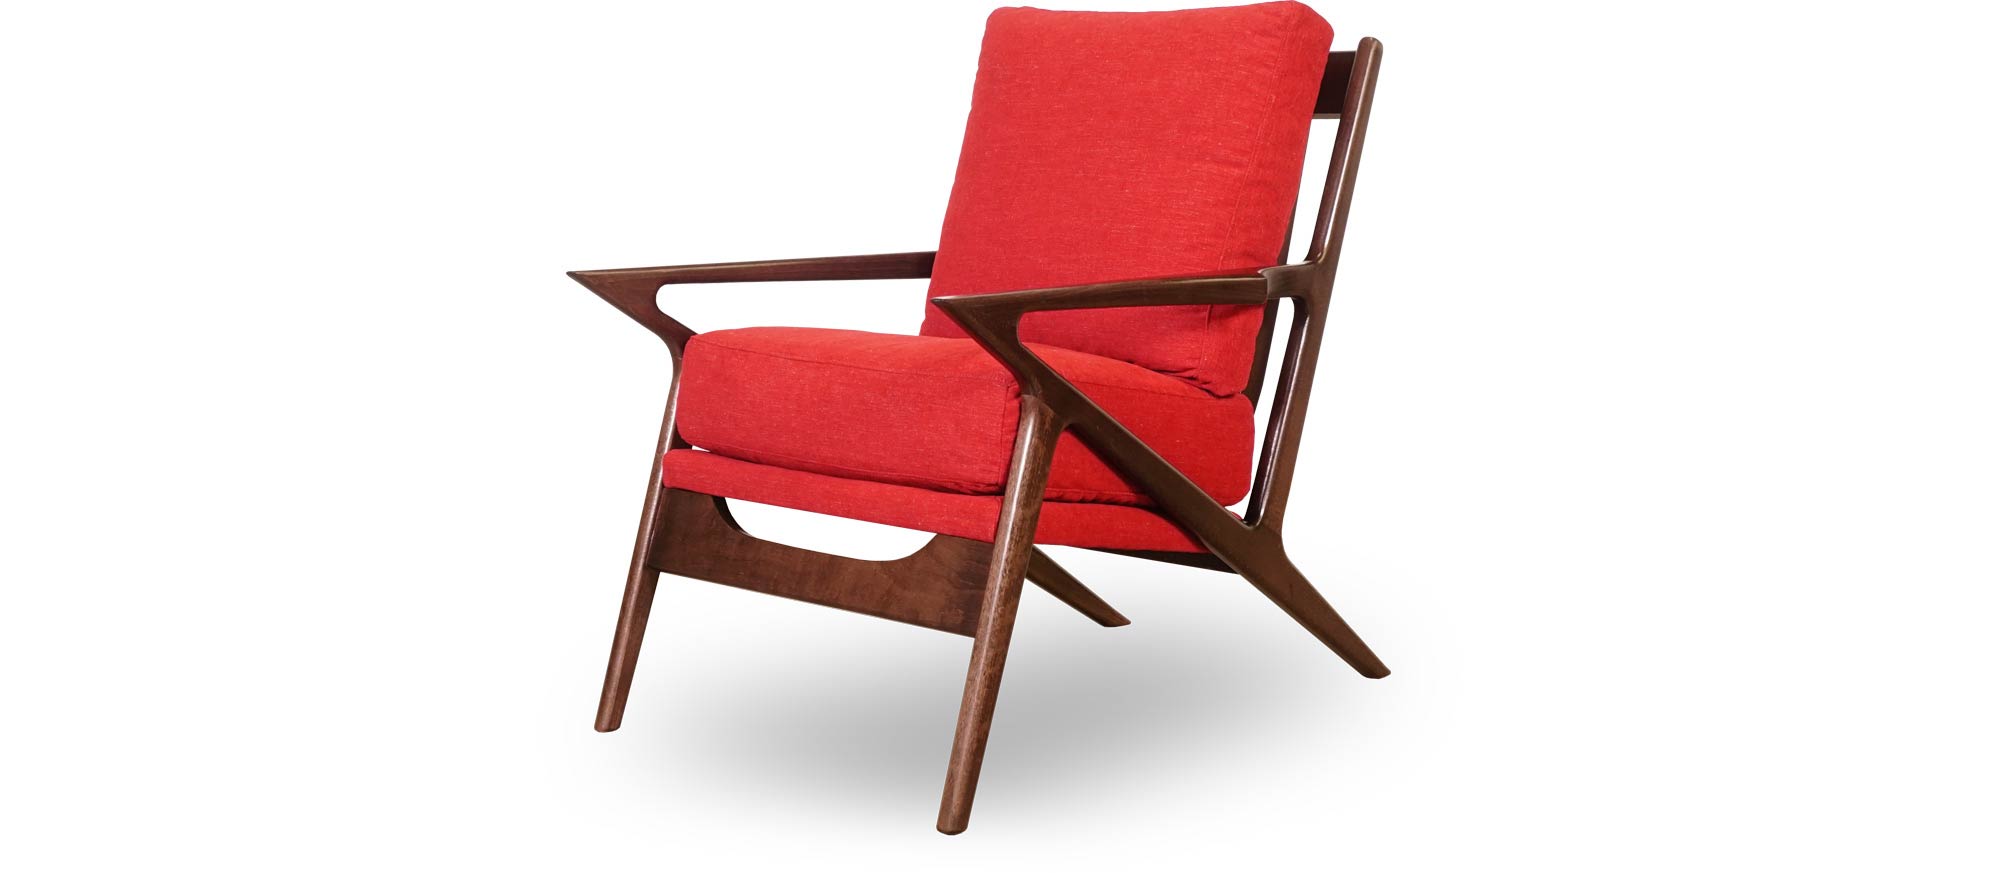 Benson MCM wood chair in walnut finish and Varick Pomegranate stain-proof fabric